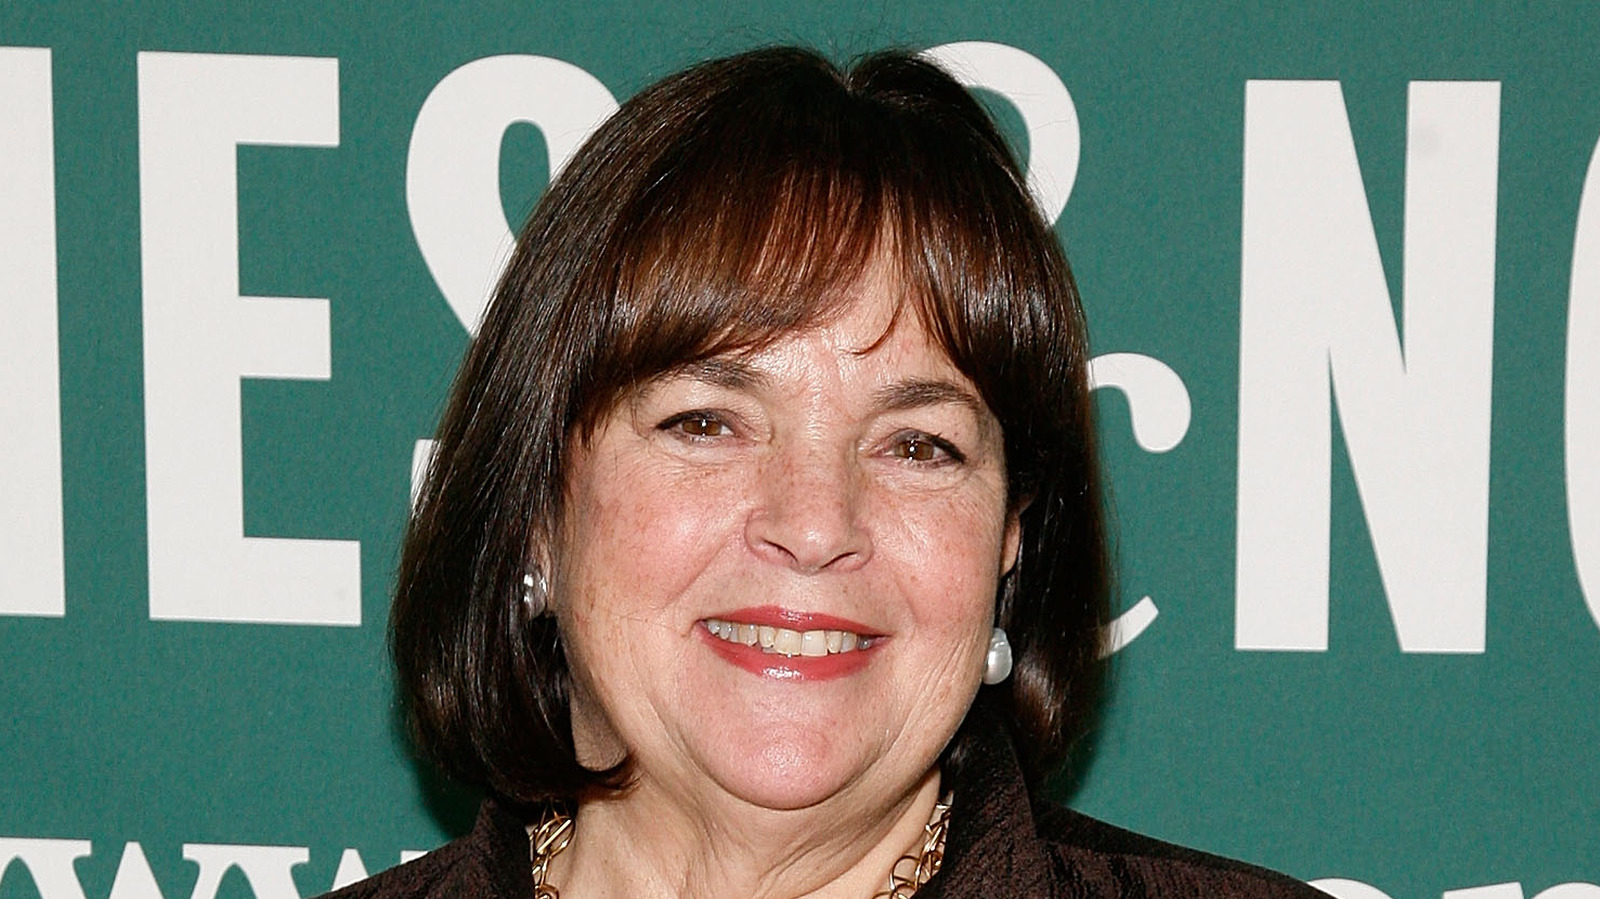 10 Foods Ina Garten Flat Out Doesn't Like